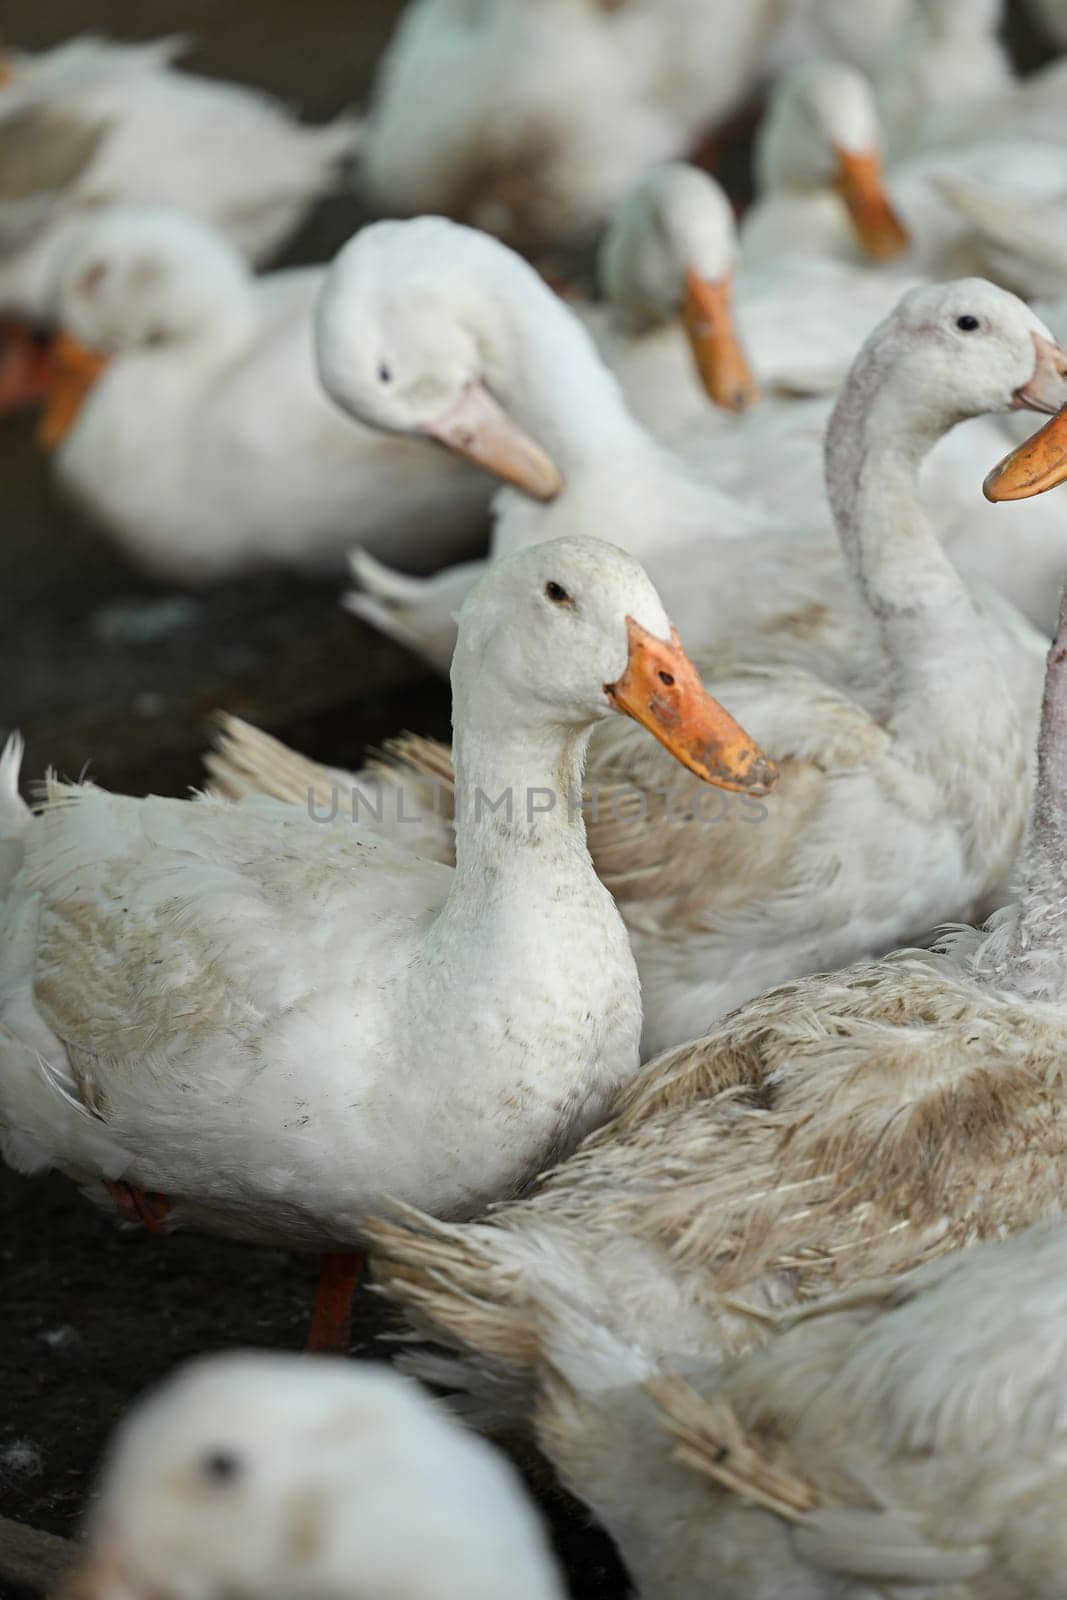 Flock of white domestic duck on the rural farm. Poultry and subsistence farming concept by prathanchorruangsak